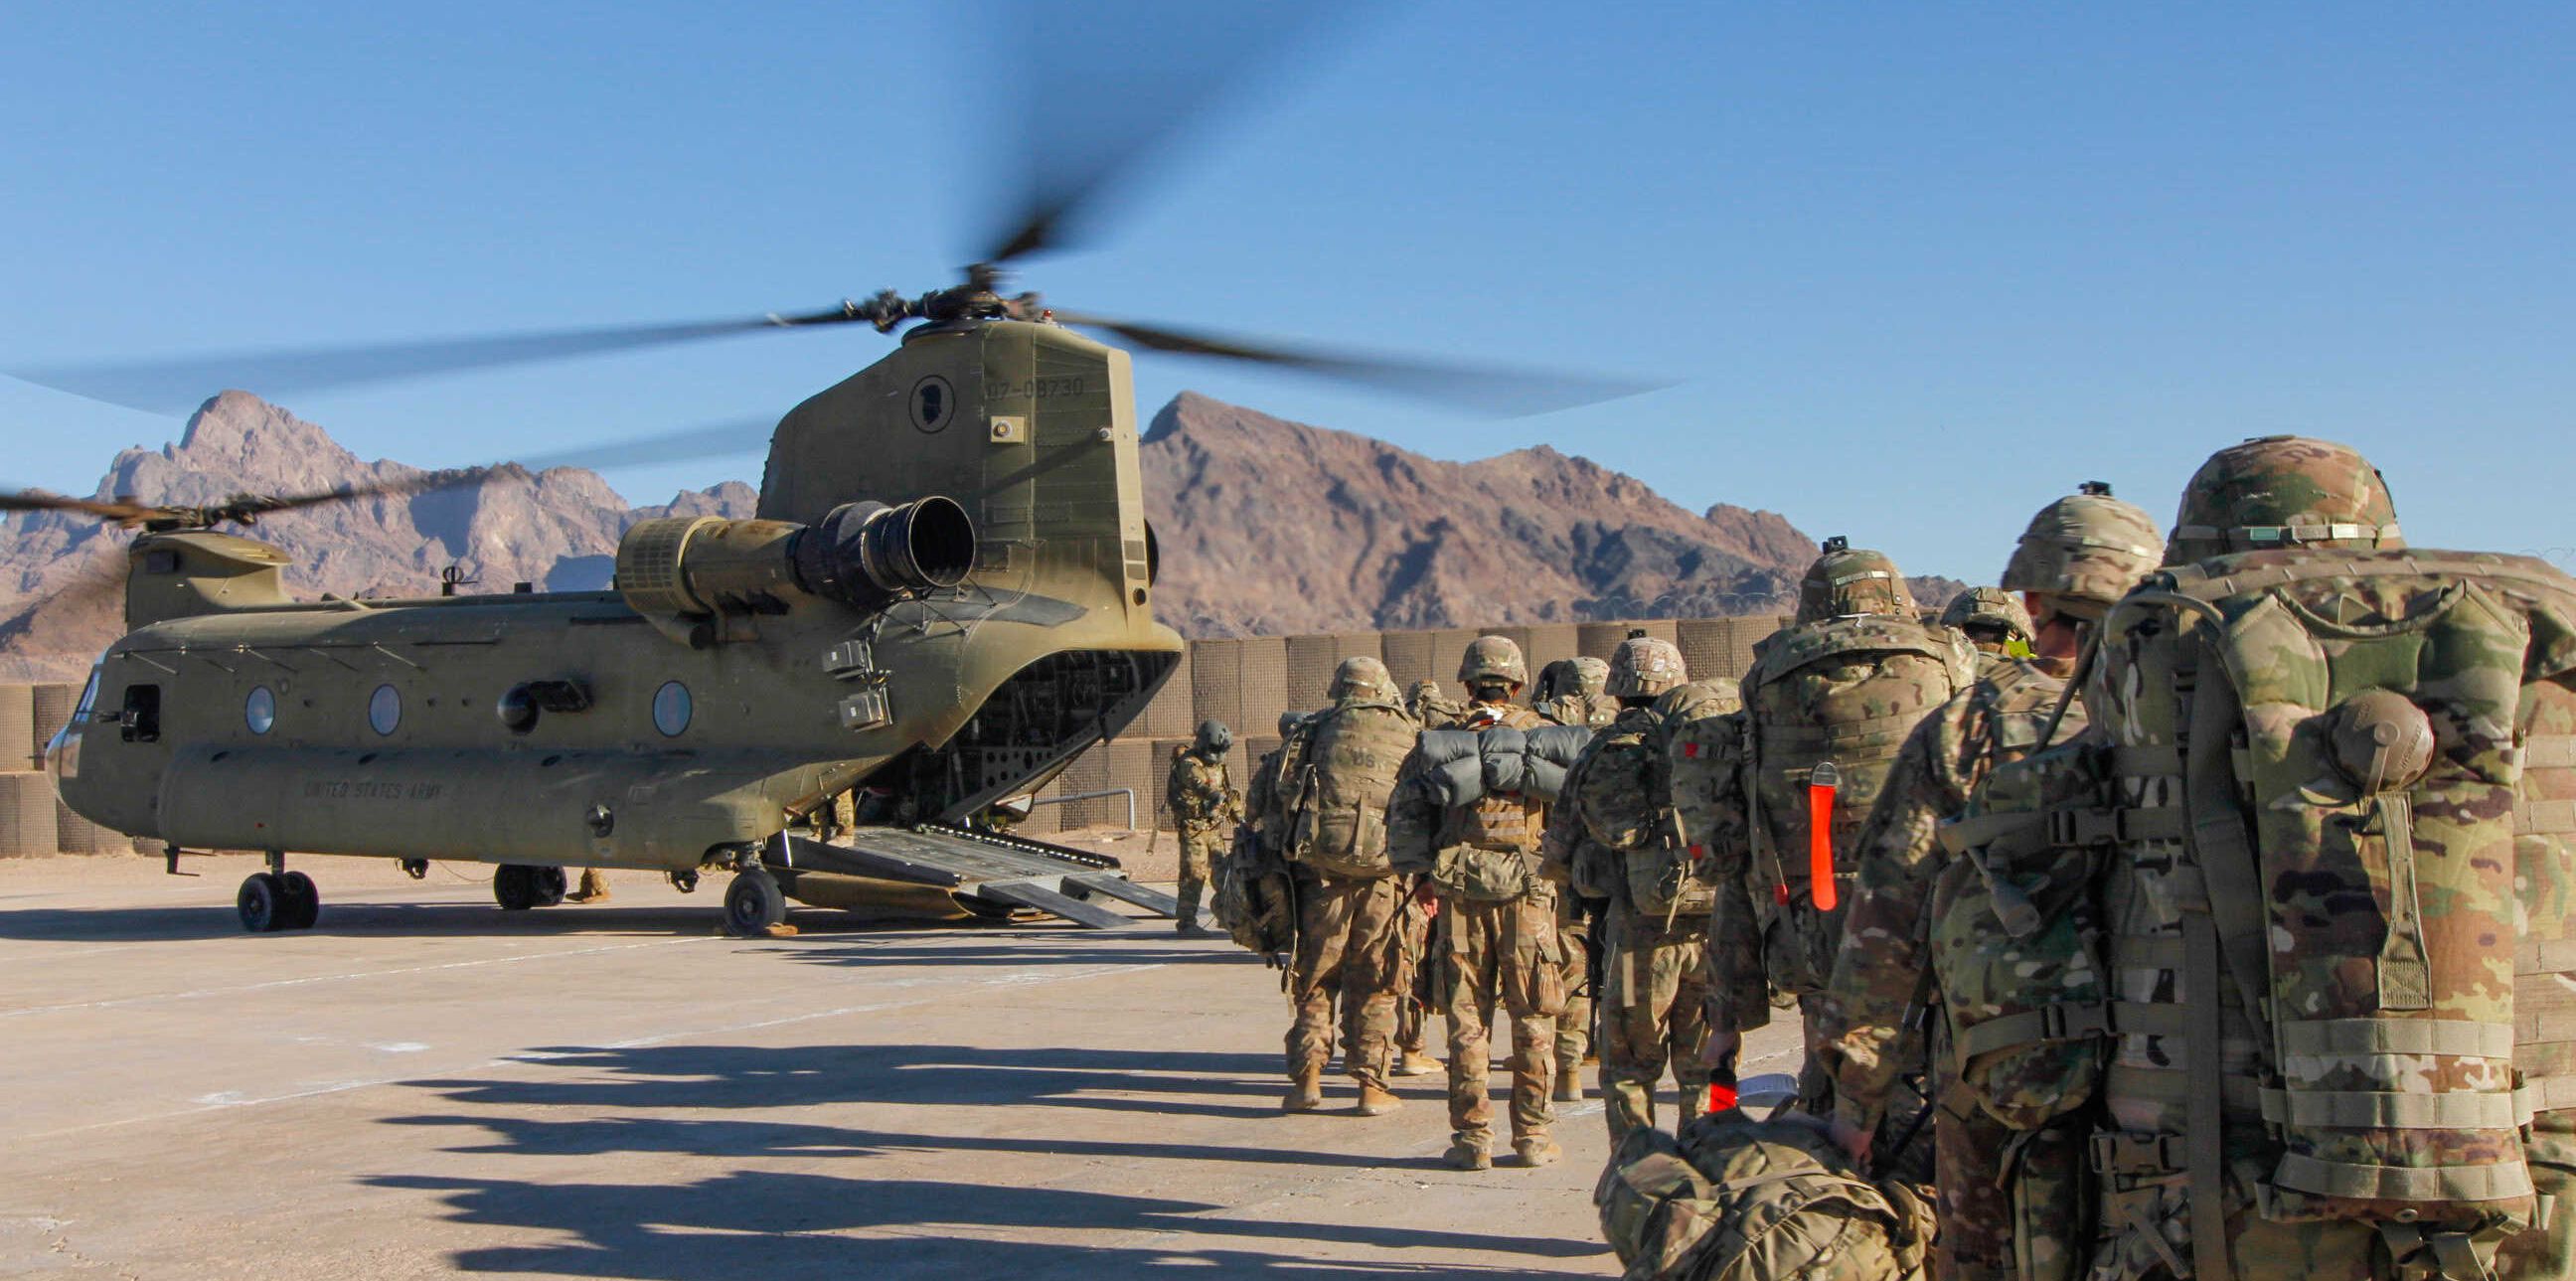 U.S. soldiers load onto a Chinook helicopter to head out on a mission in Afghanistan, Jan. 15, 2019. U.S. Army.